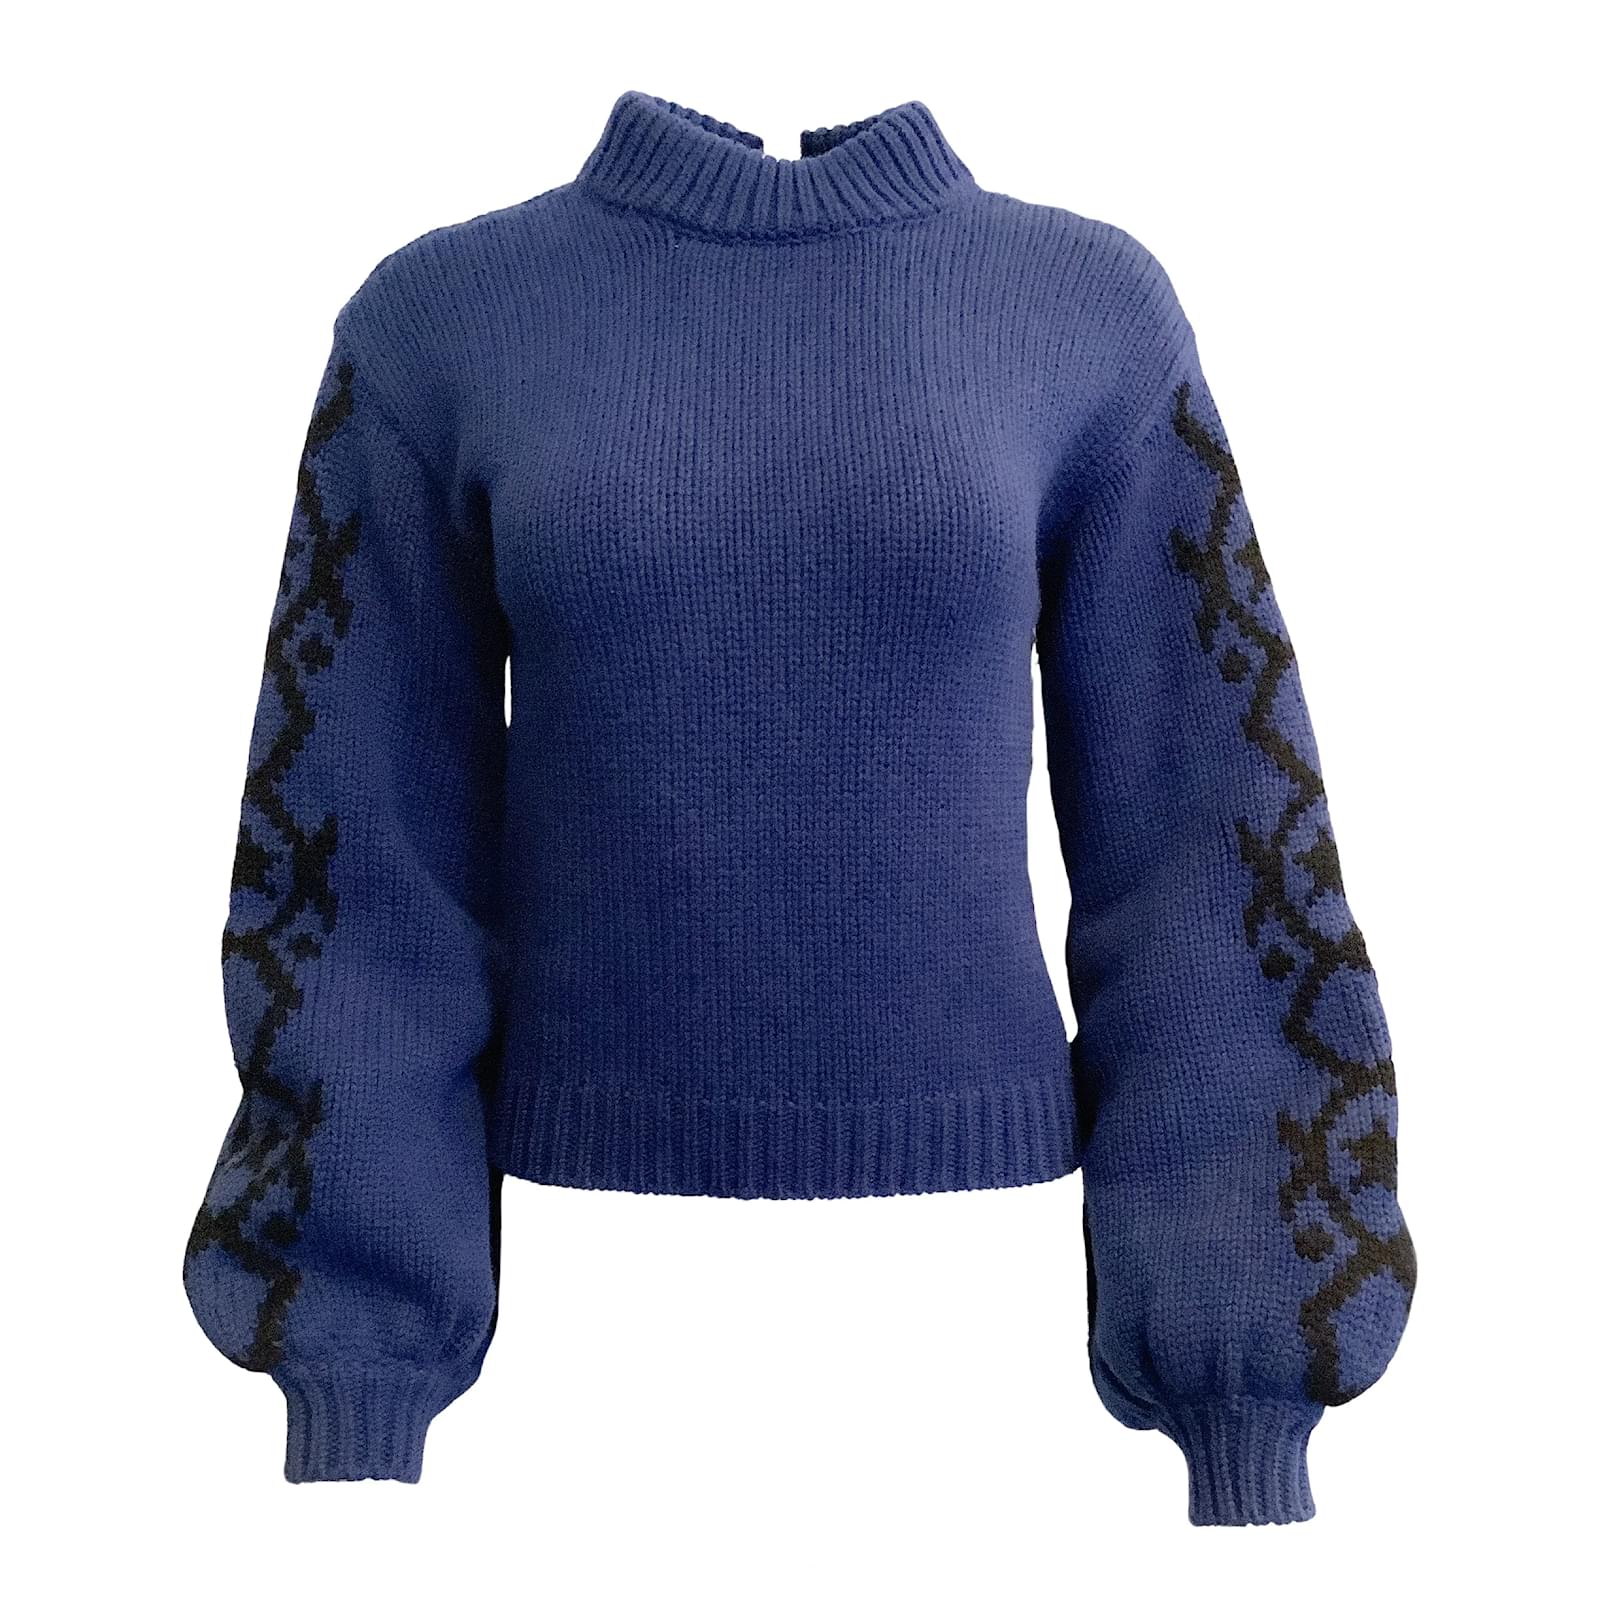 KNIT SWEATER WITH OPEN BACK - Blue